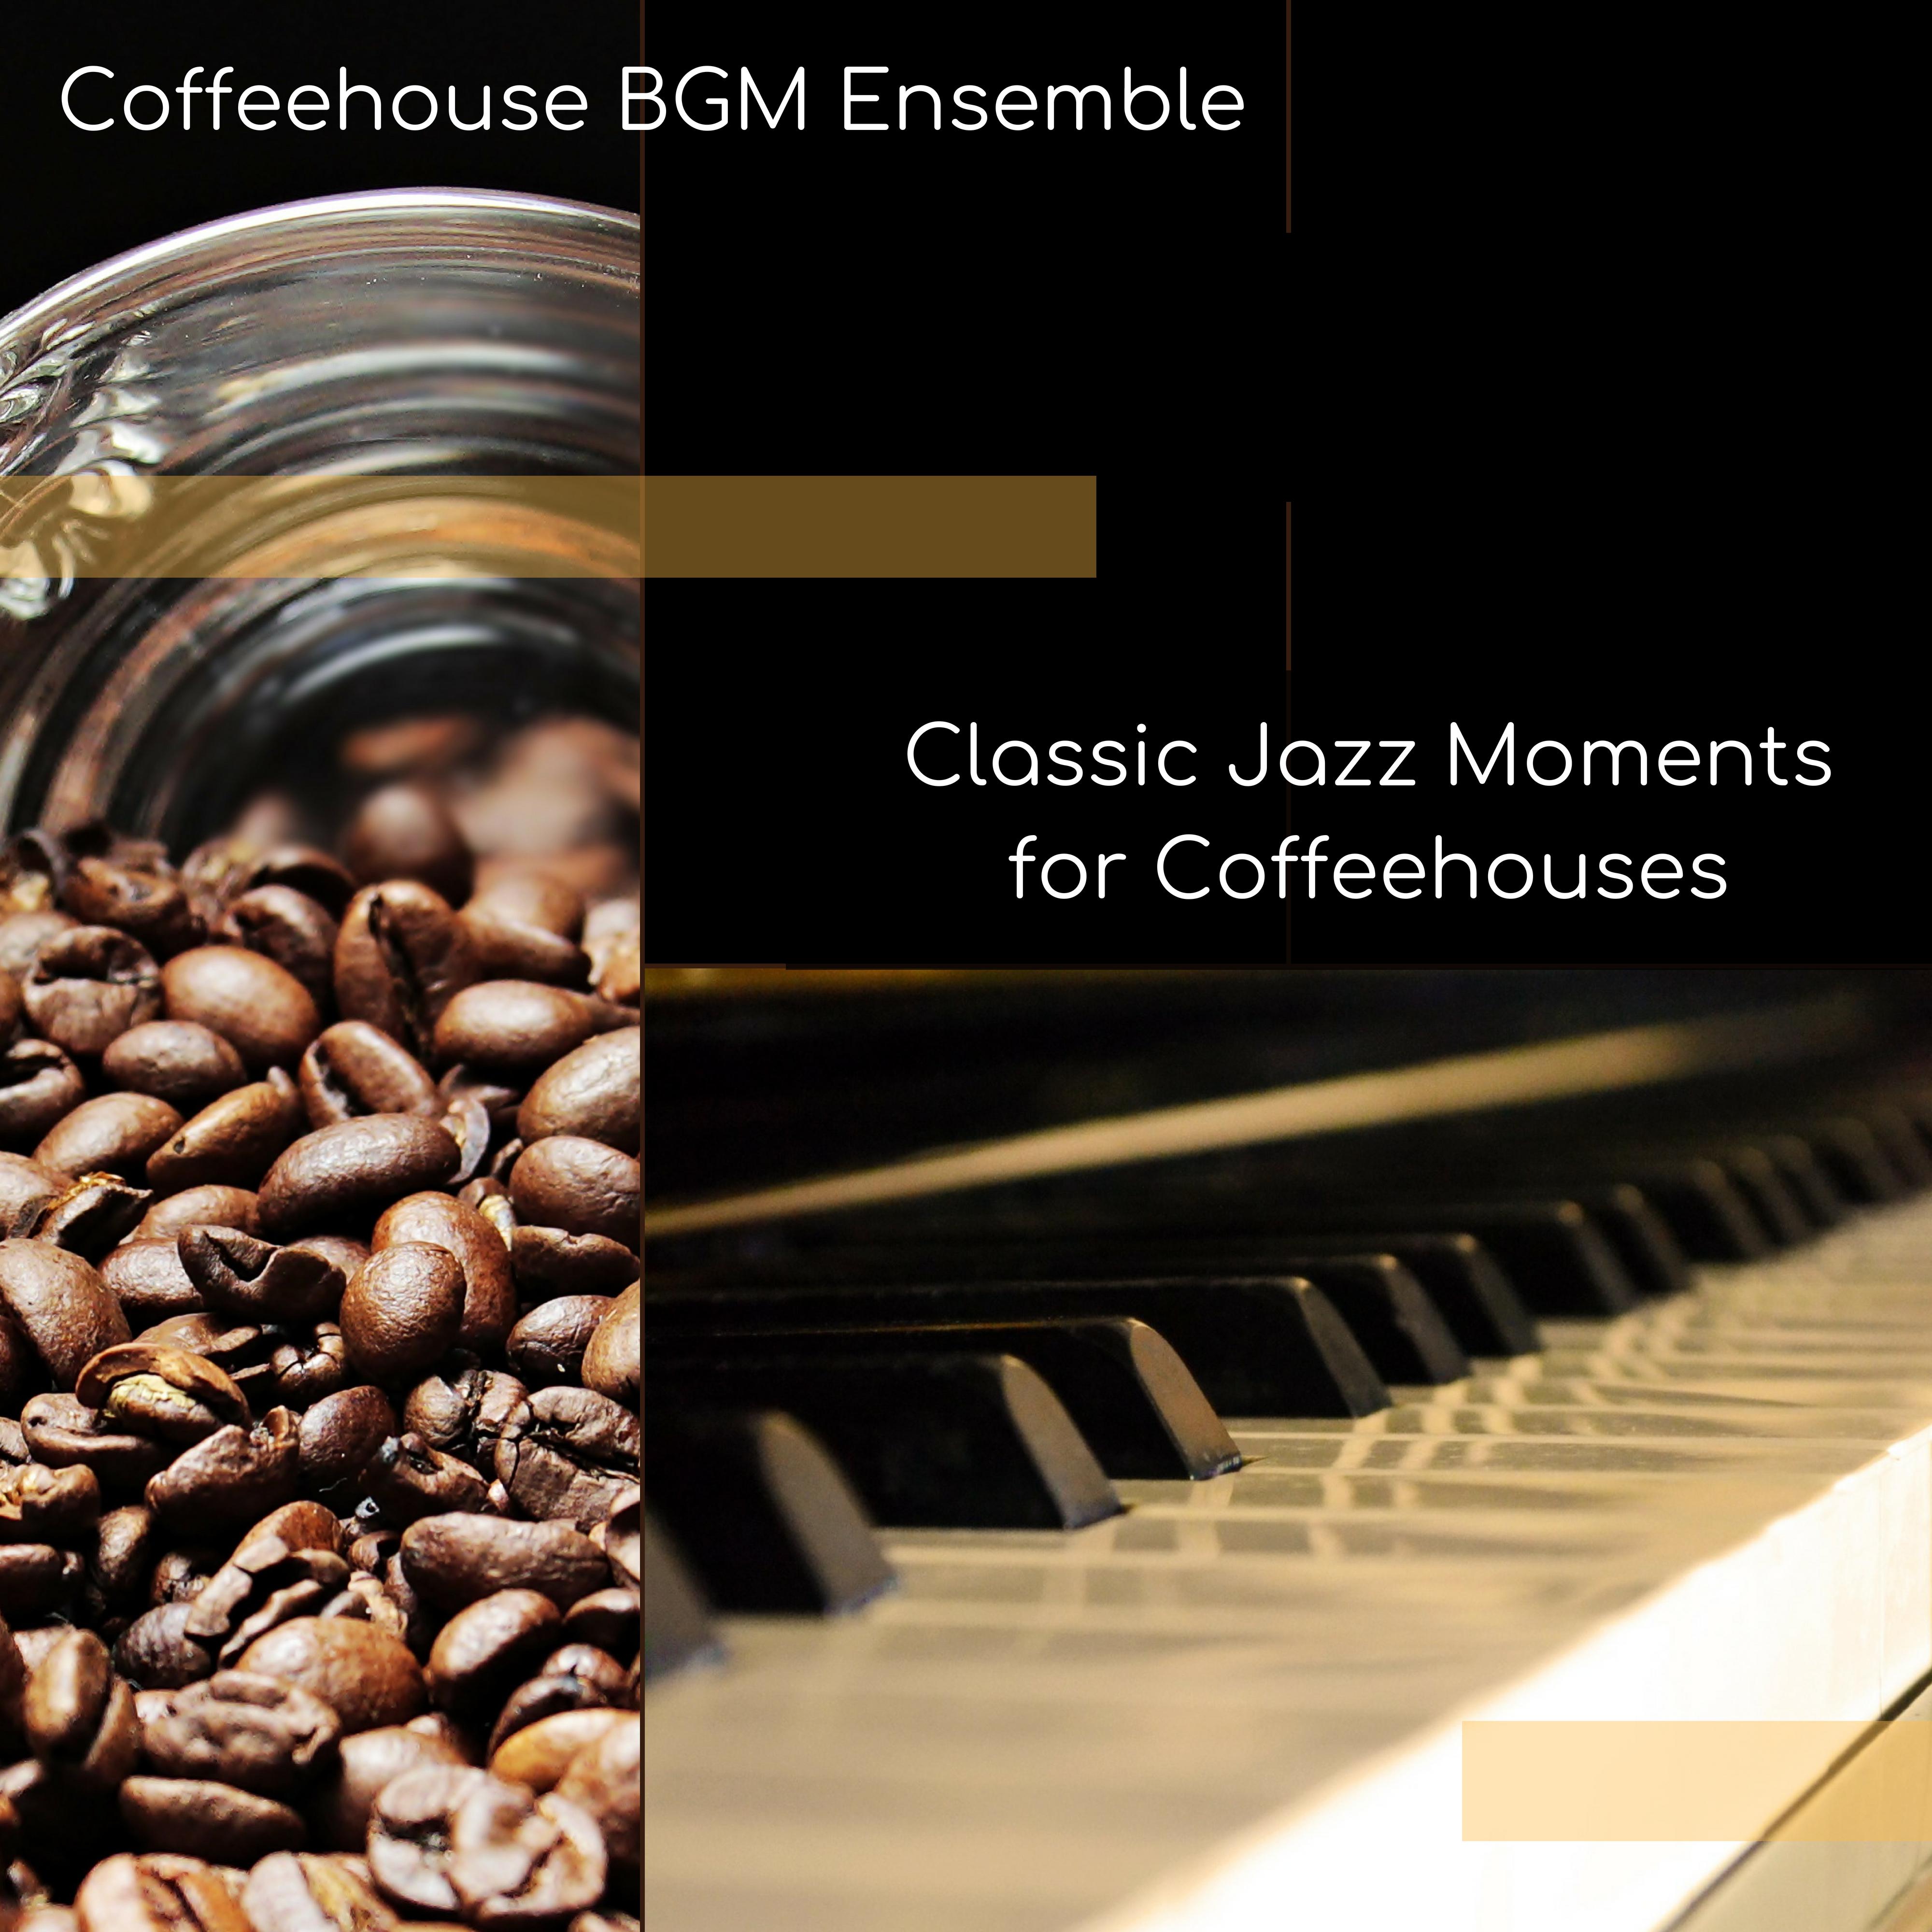 Classic Jazz Moments for Coffeehouses